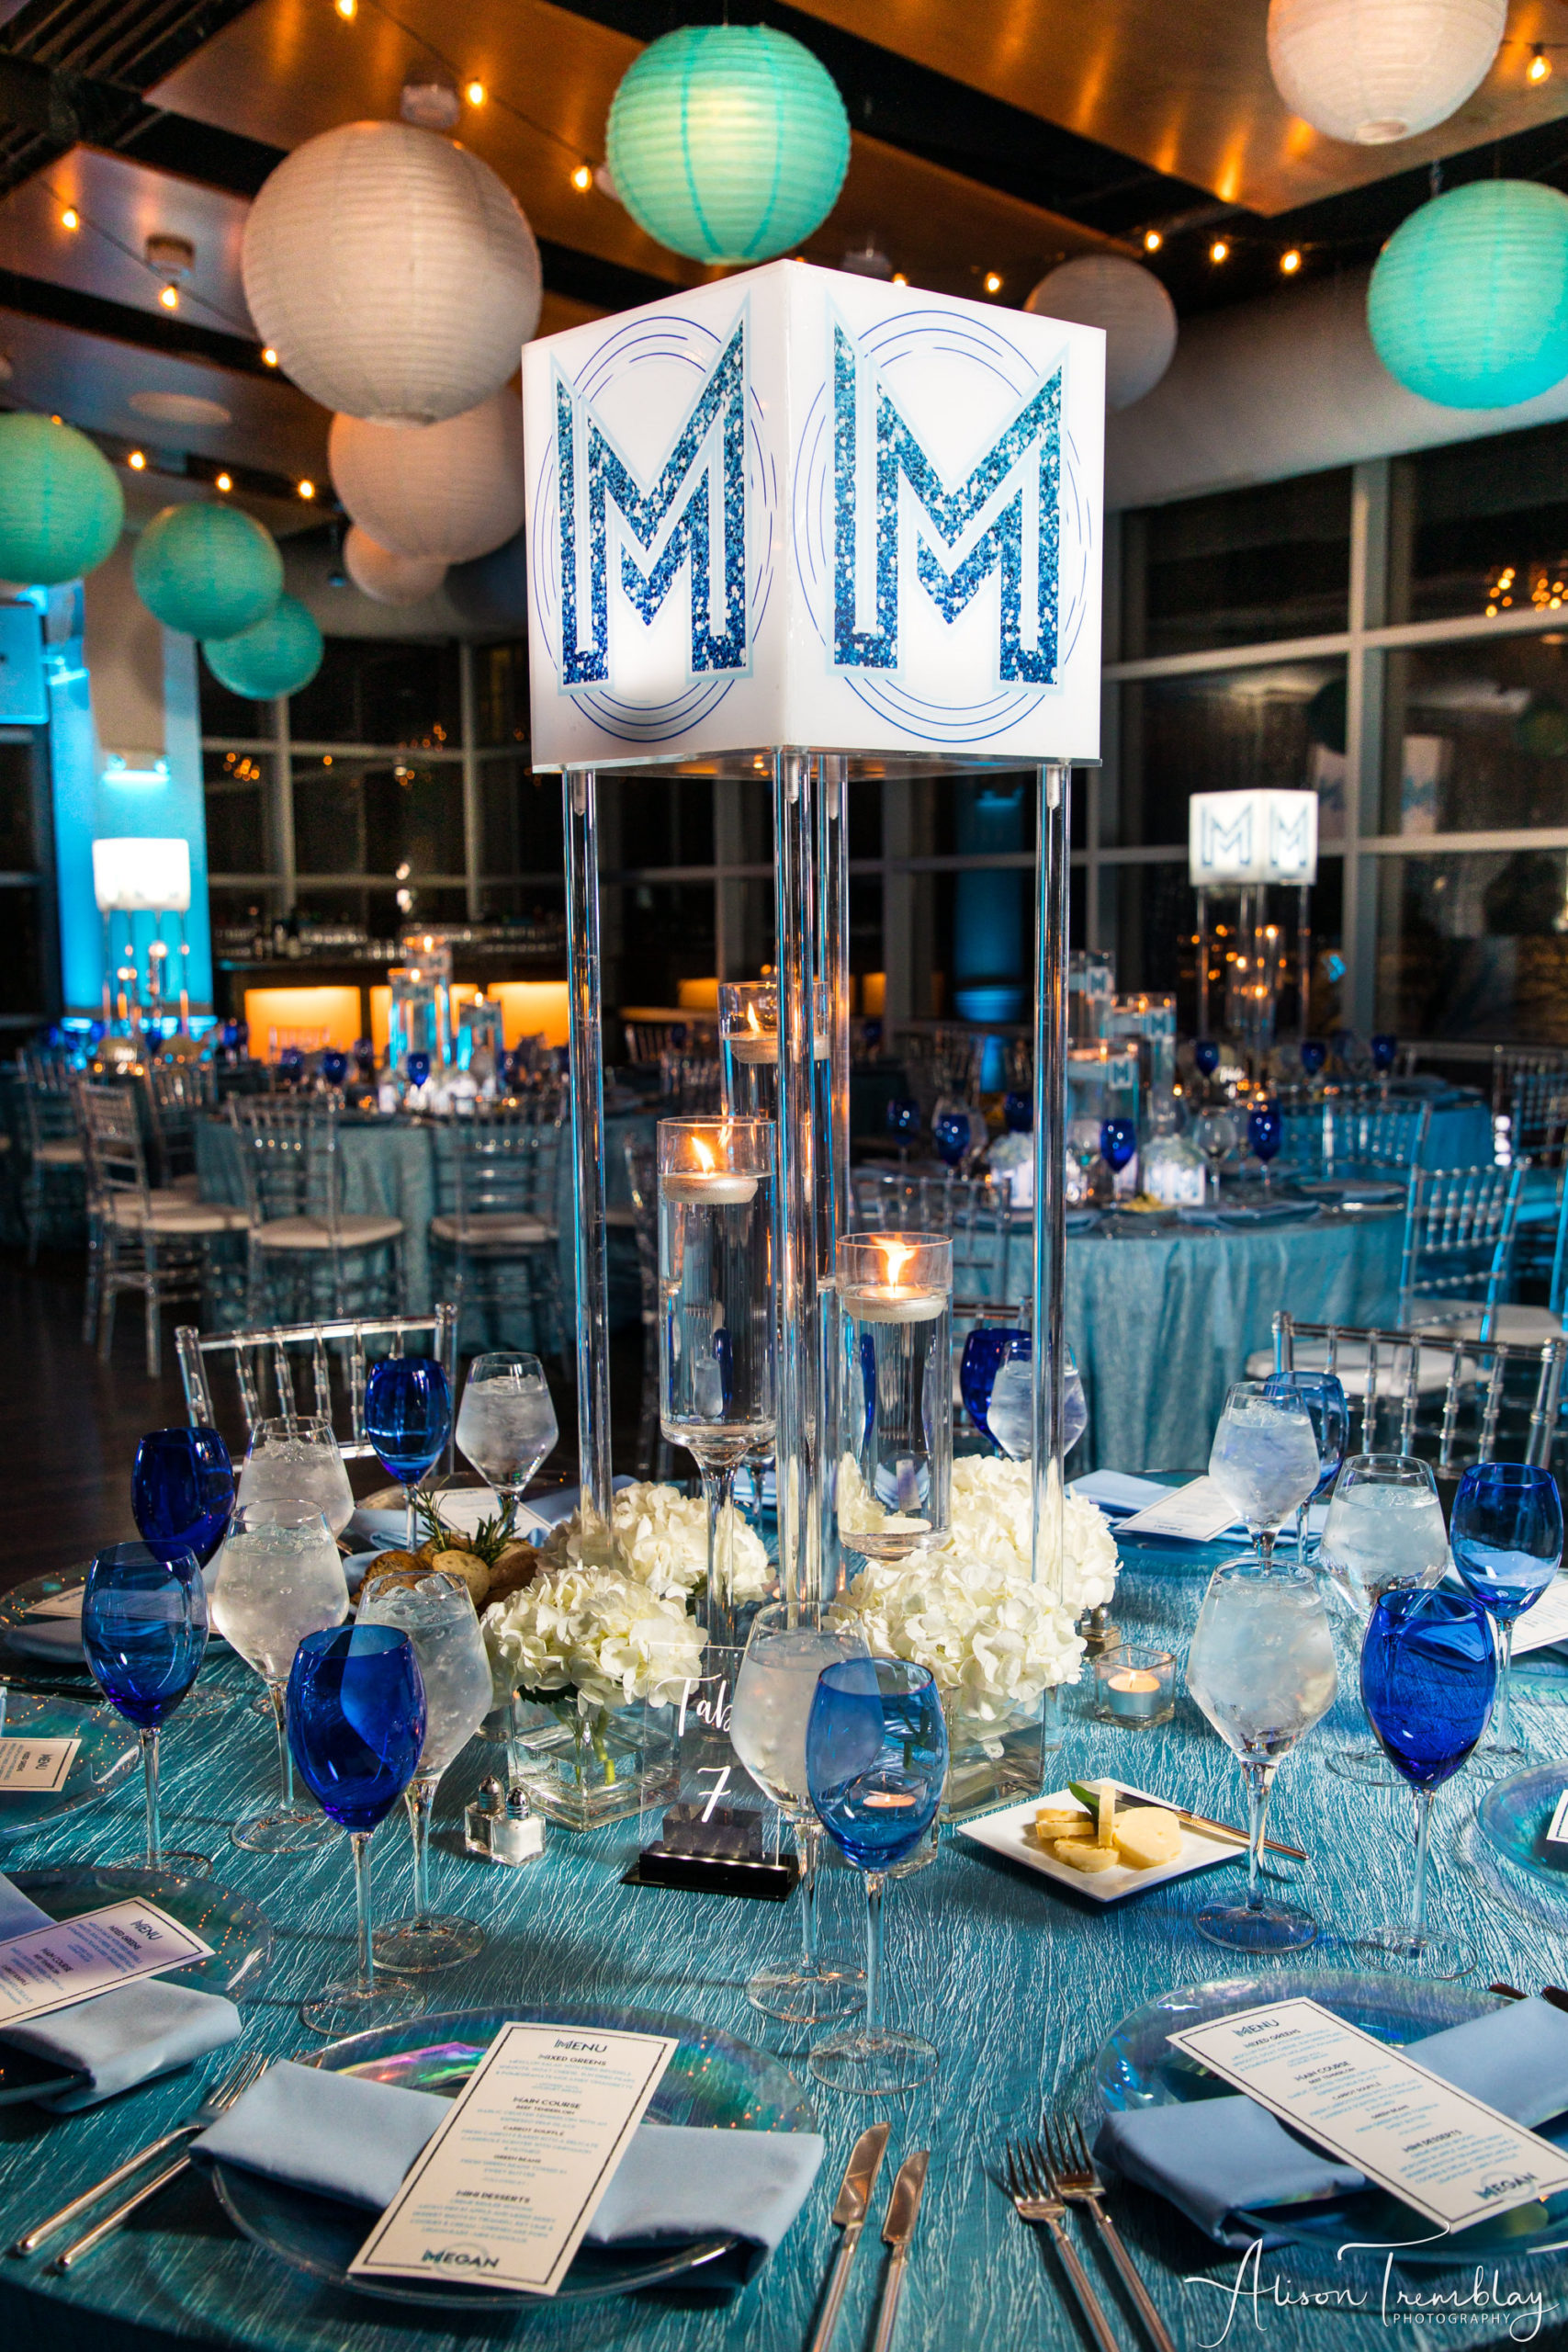 Centerpieces at Megan's Blue Sparkle Bat Mitzvah at VisArts in Rockville, MD | Pop Color Events | Adding a Pop of Color to Bar & Bat Mitzvahs in DC, MD & VA | Photo by: Alison Tremblay Photography